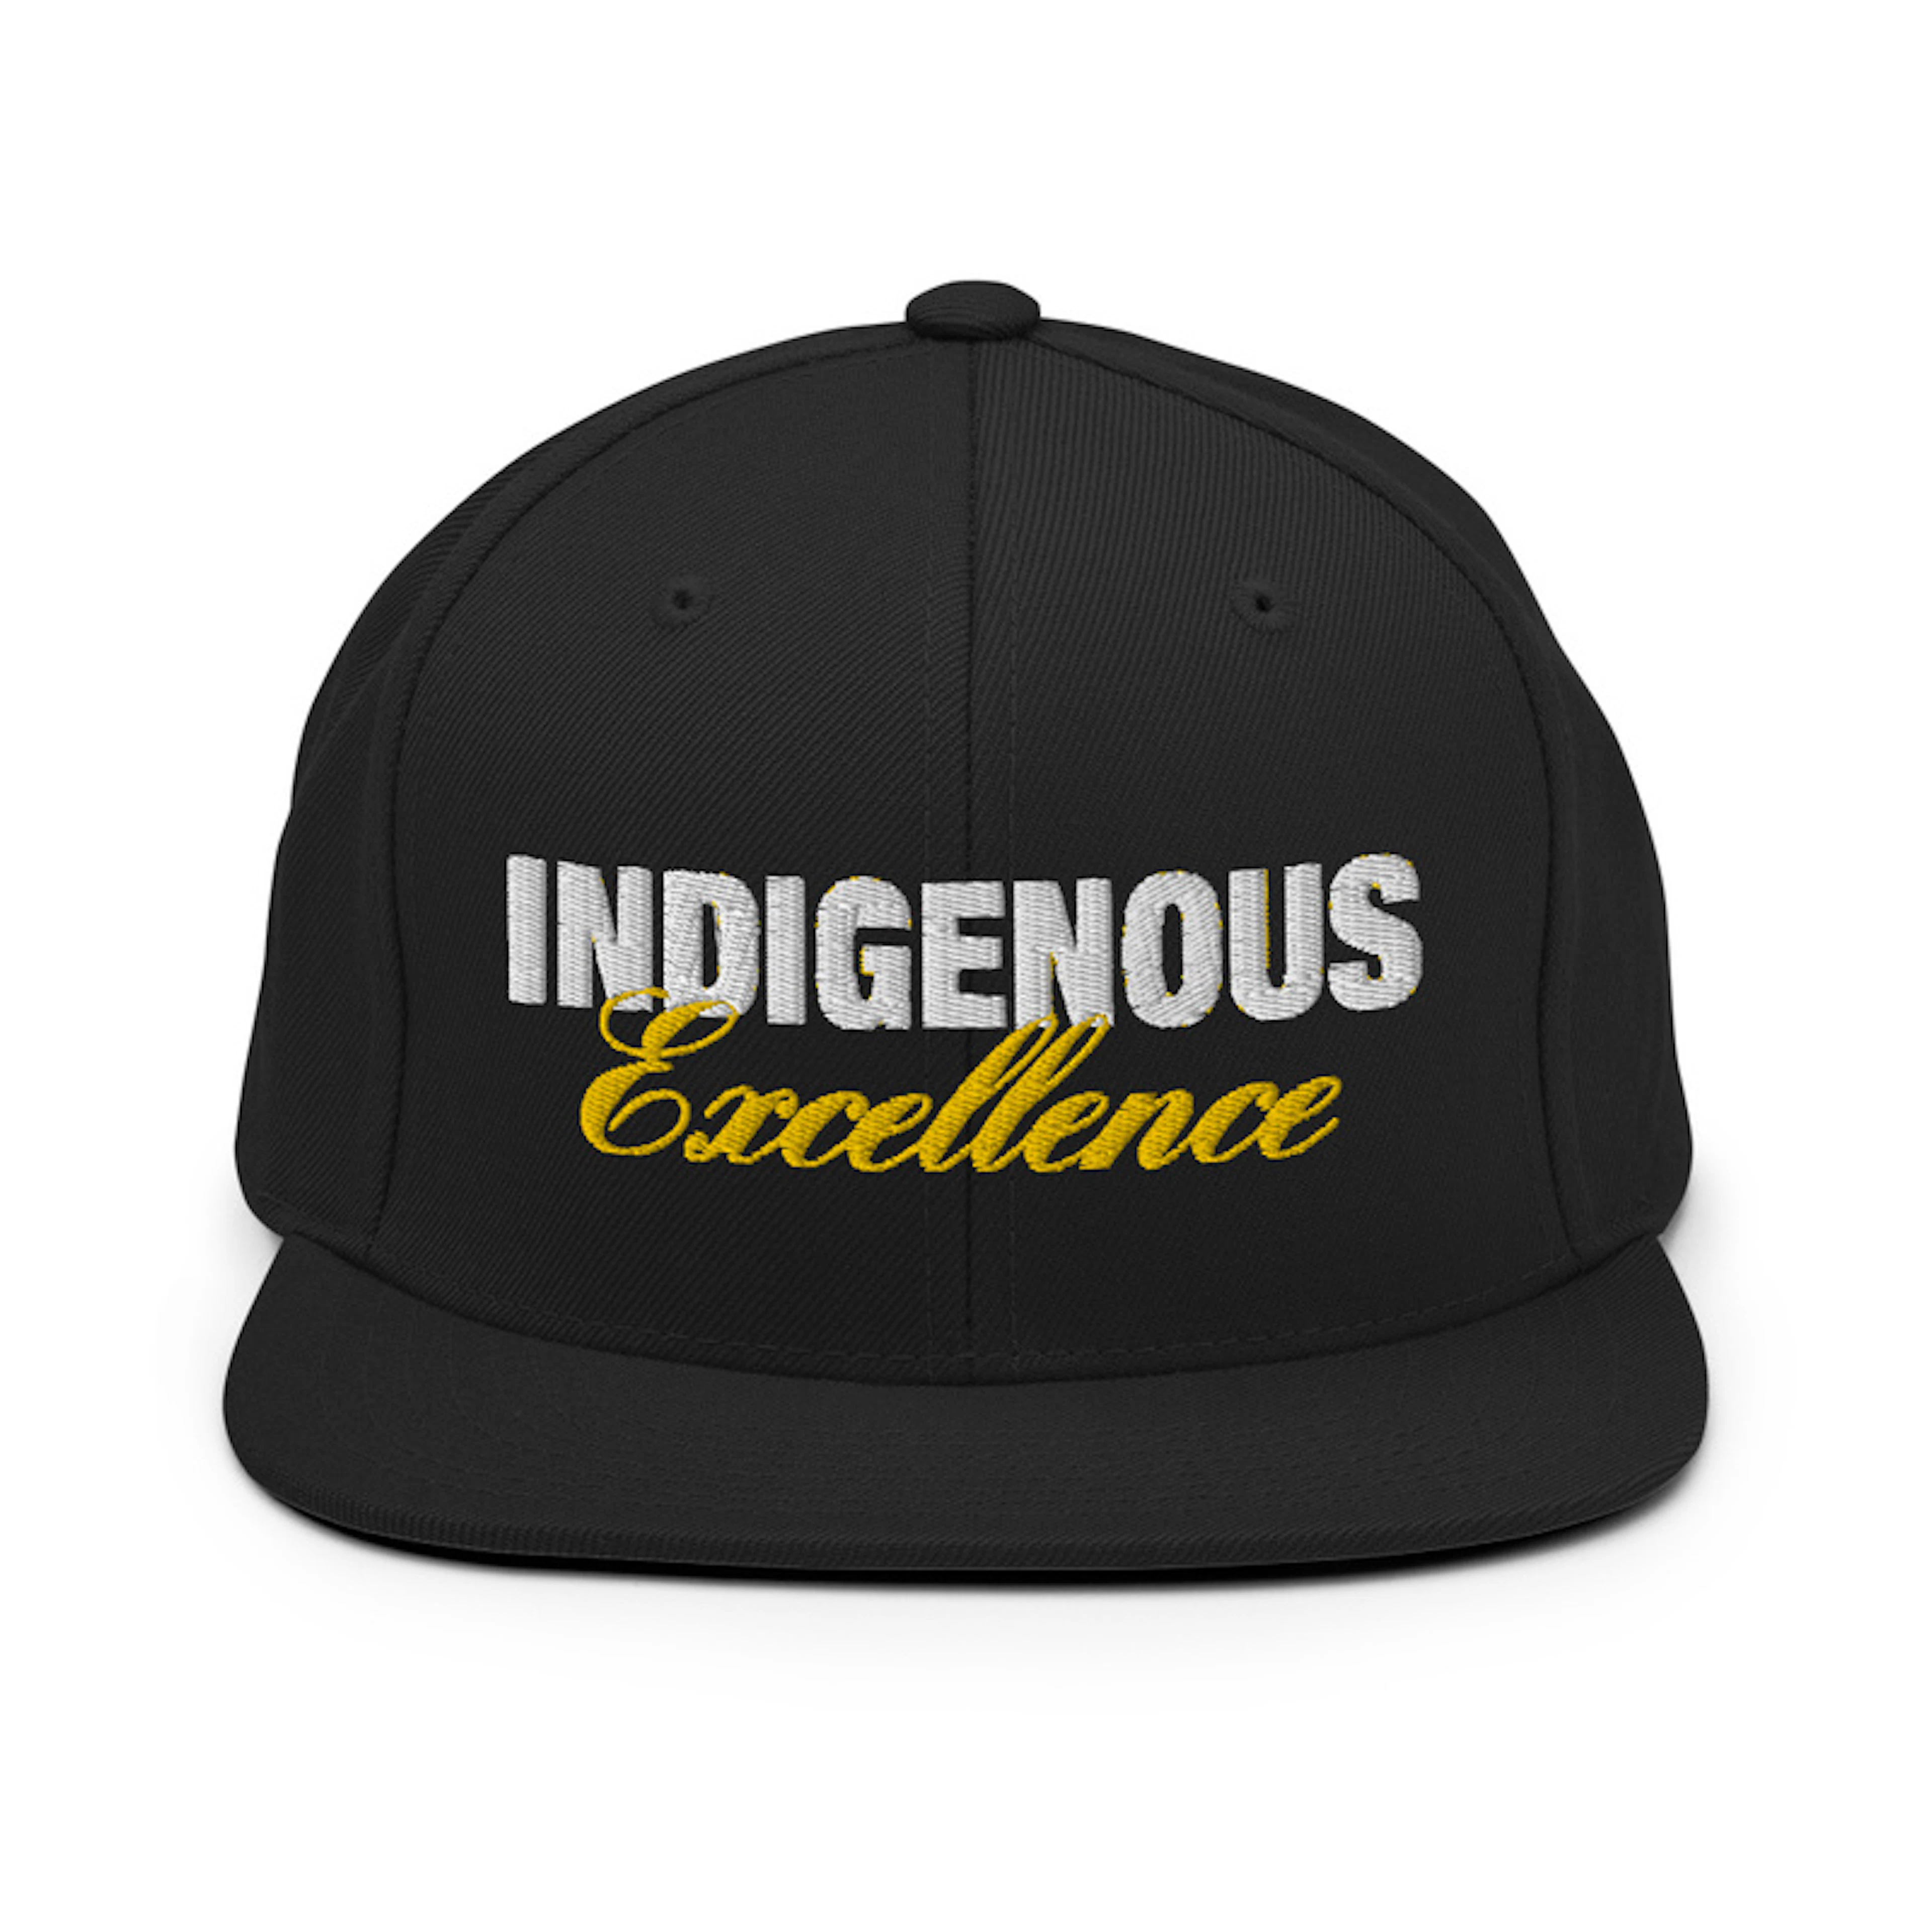 INDIGENOUS EXCELLENCE Snapback